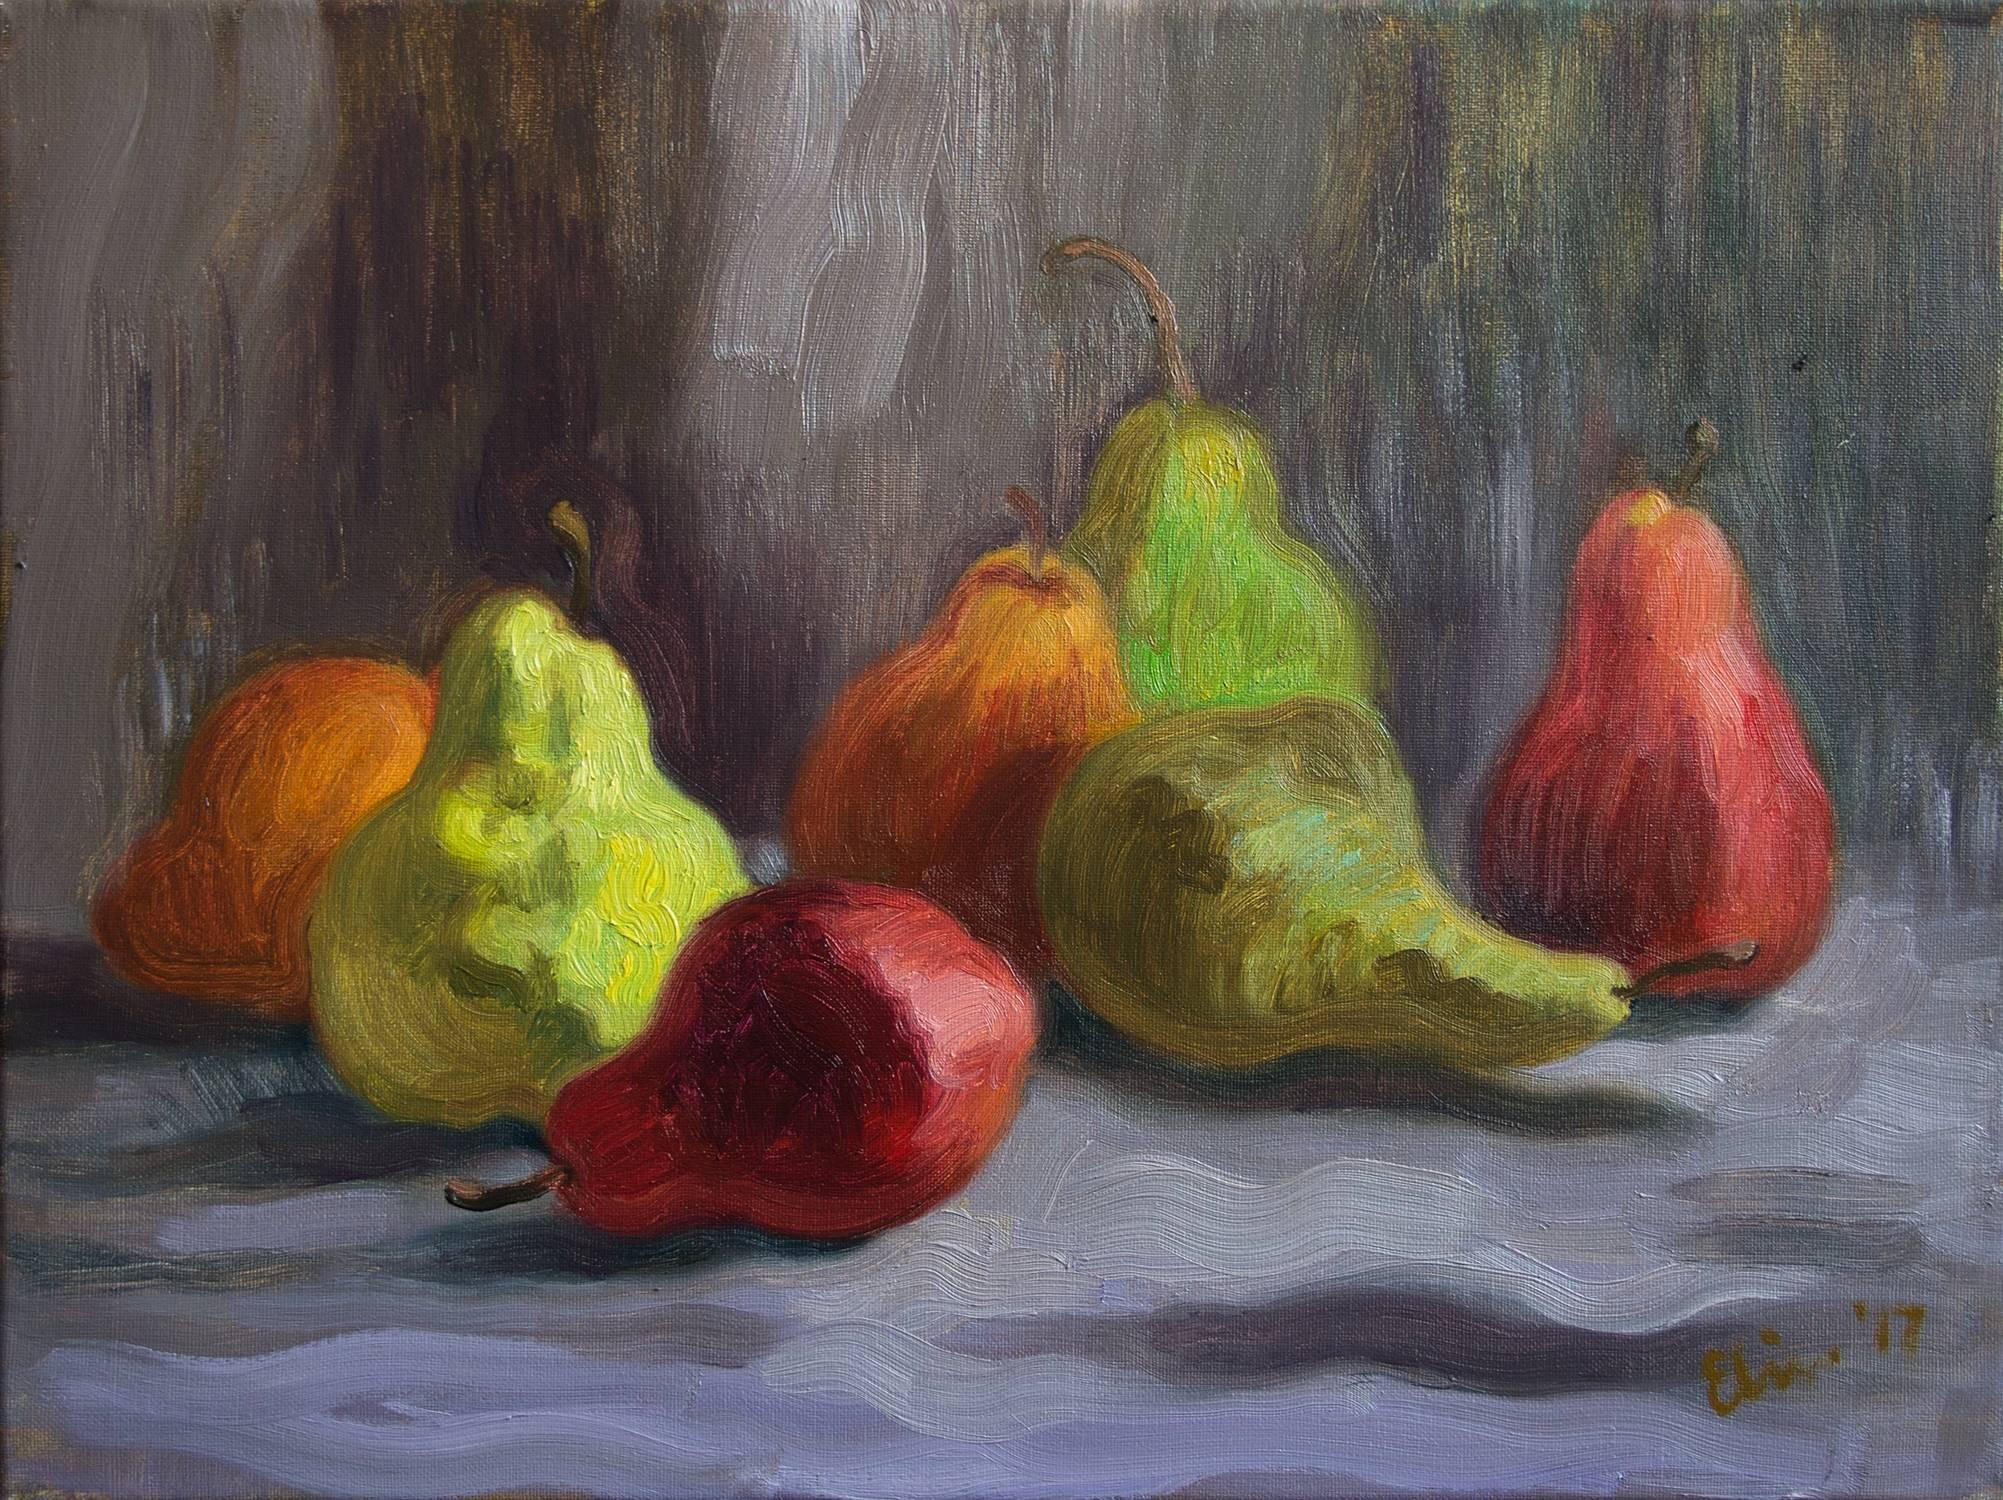 Title: Still Life with Pears
Artist: Elina Arbidane (emerging Contemporary Impressionist painter), Latvia
Original hand-painted impressionist oil on canvas still life with colourful pears
Not a print or copy, only one available
Unframed size 40